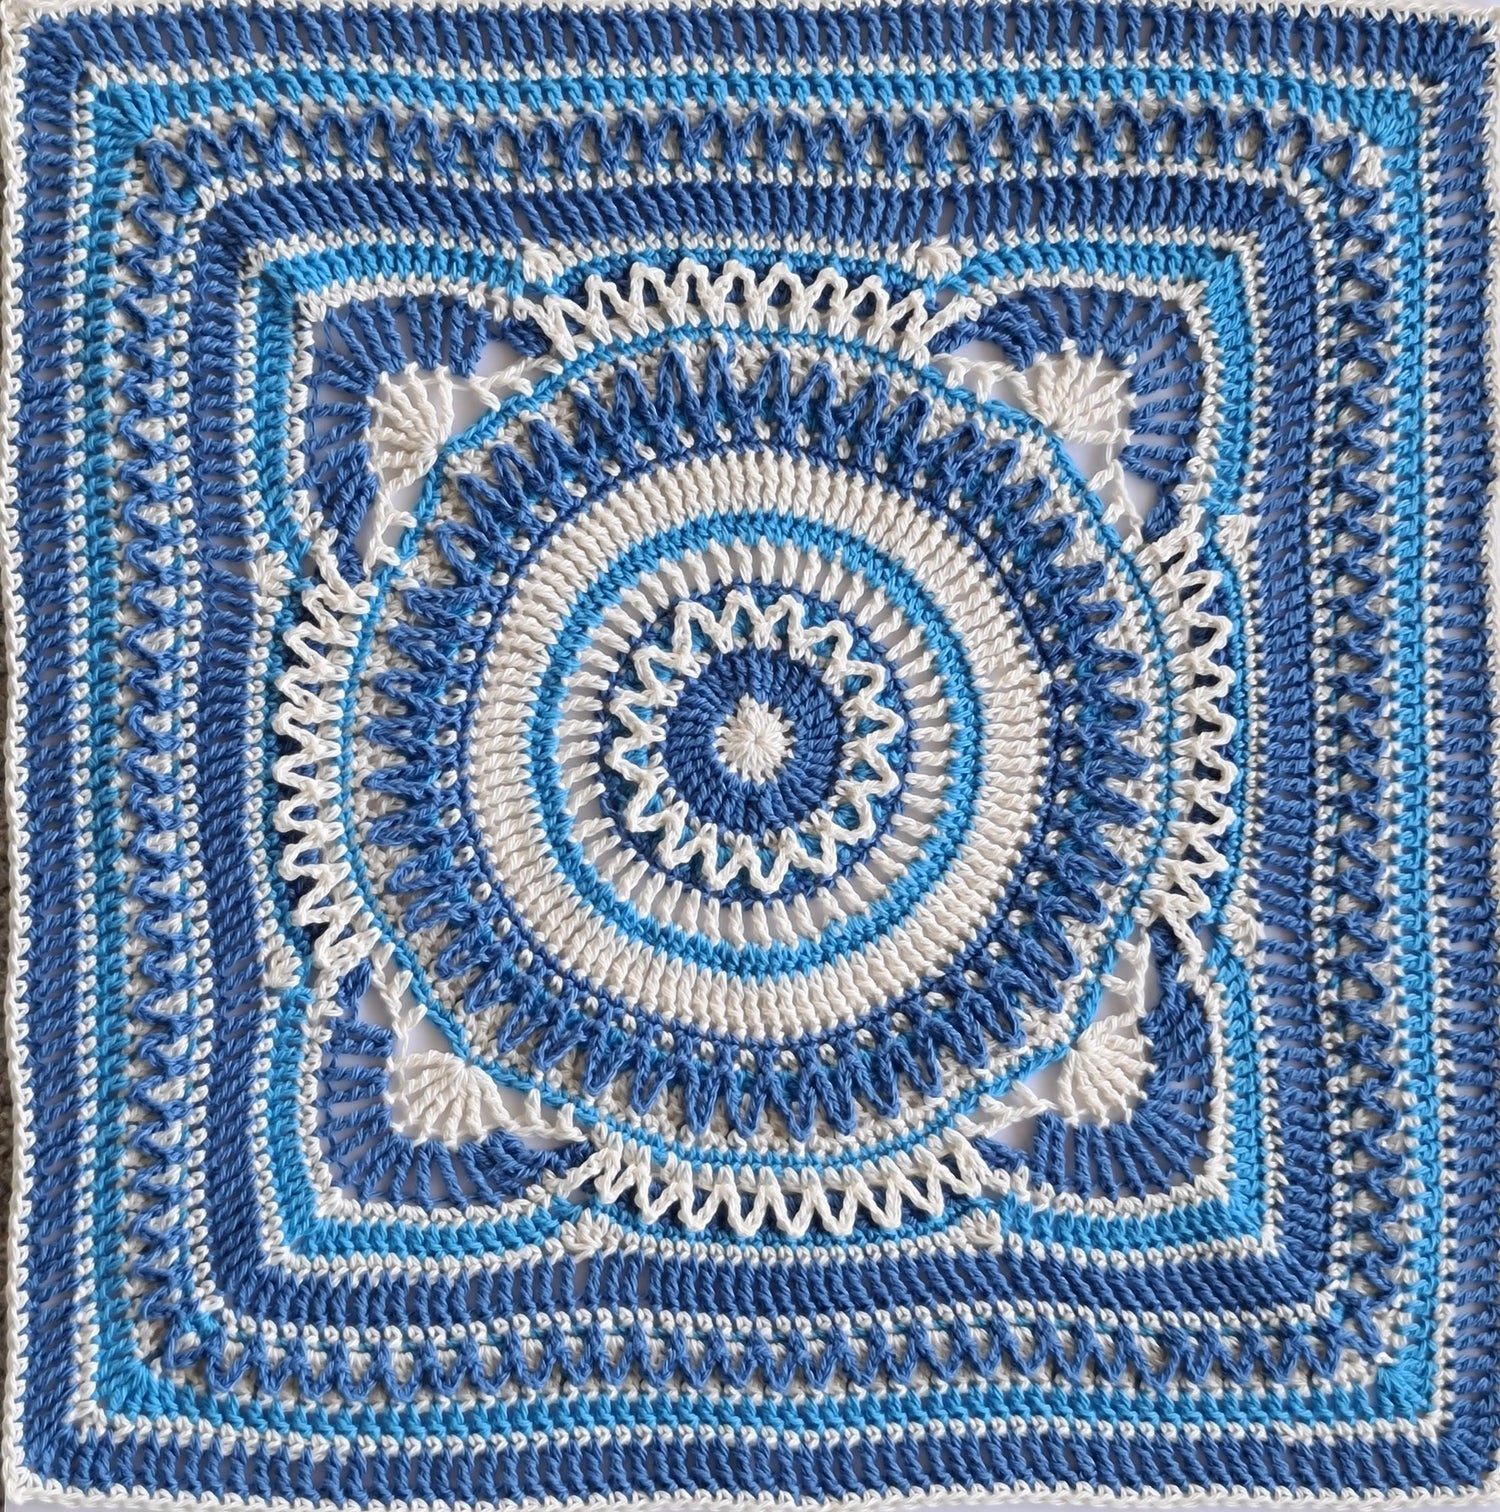 Hope large granny square in blues and white by Shelley Husband